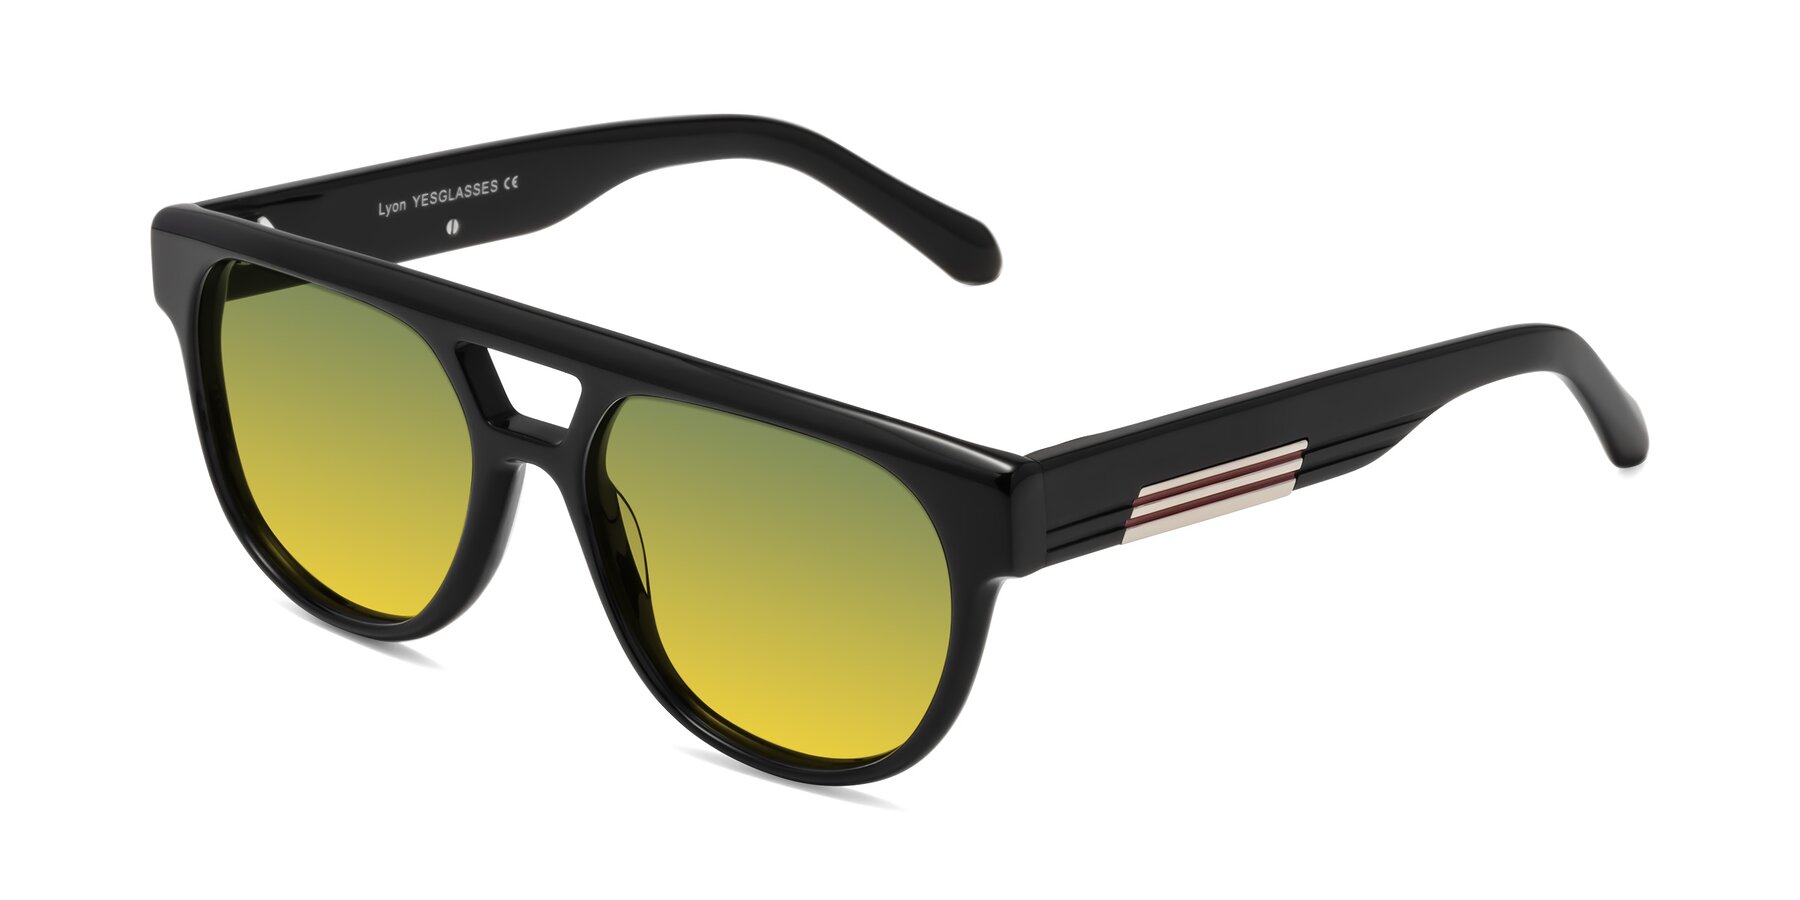 Angle of Lyon in Black with Green / Yellow Gradient Lenses